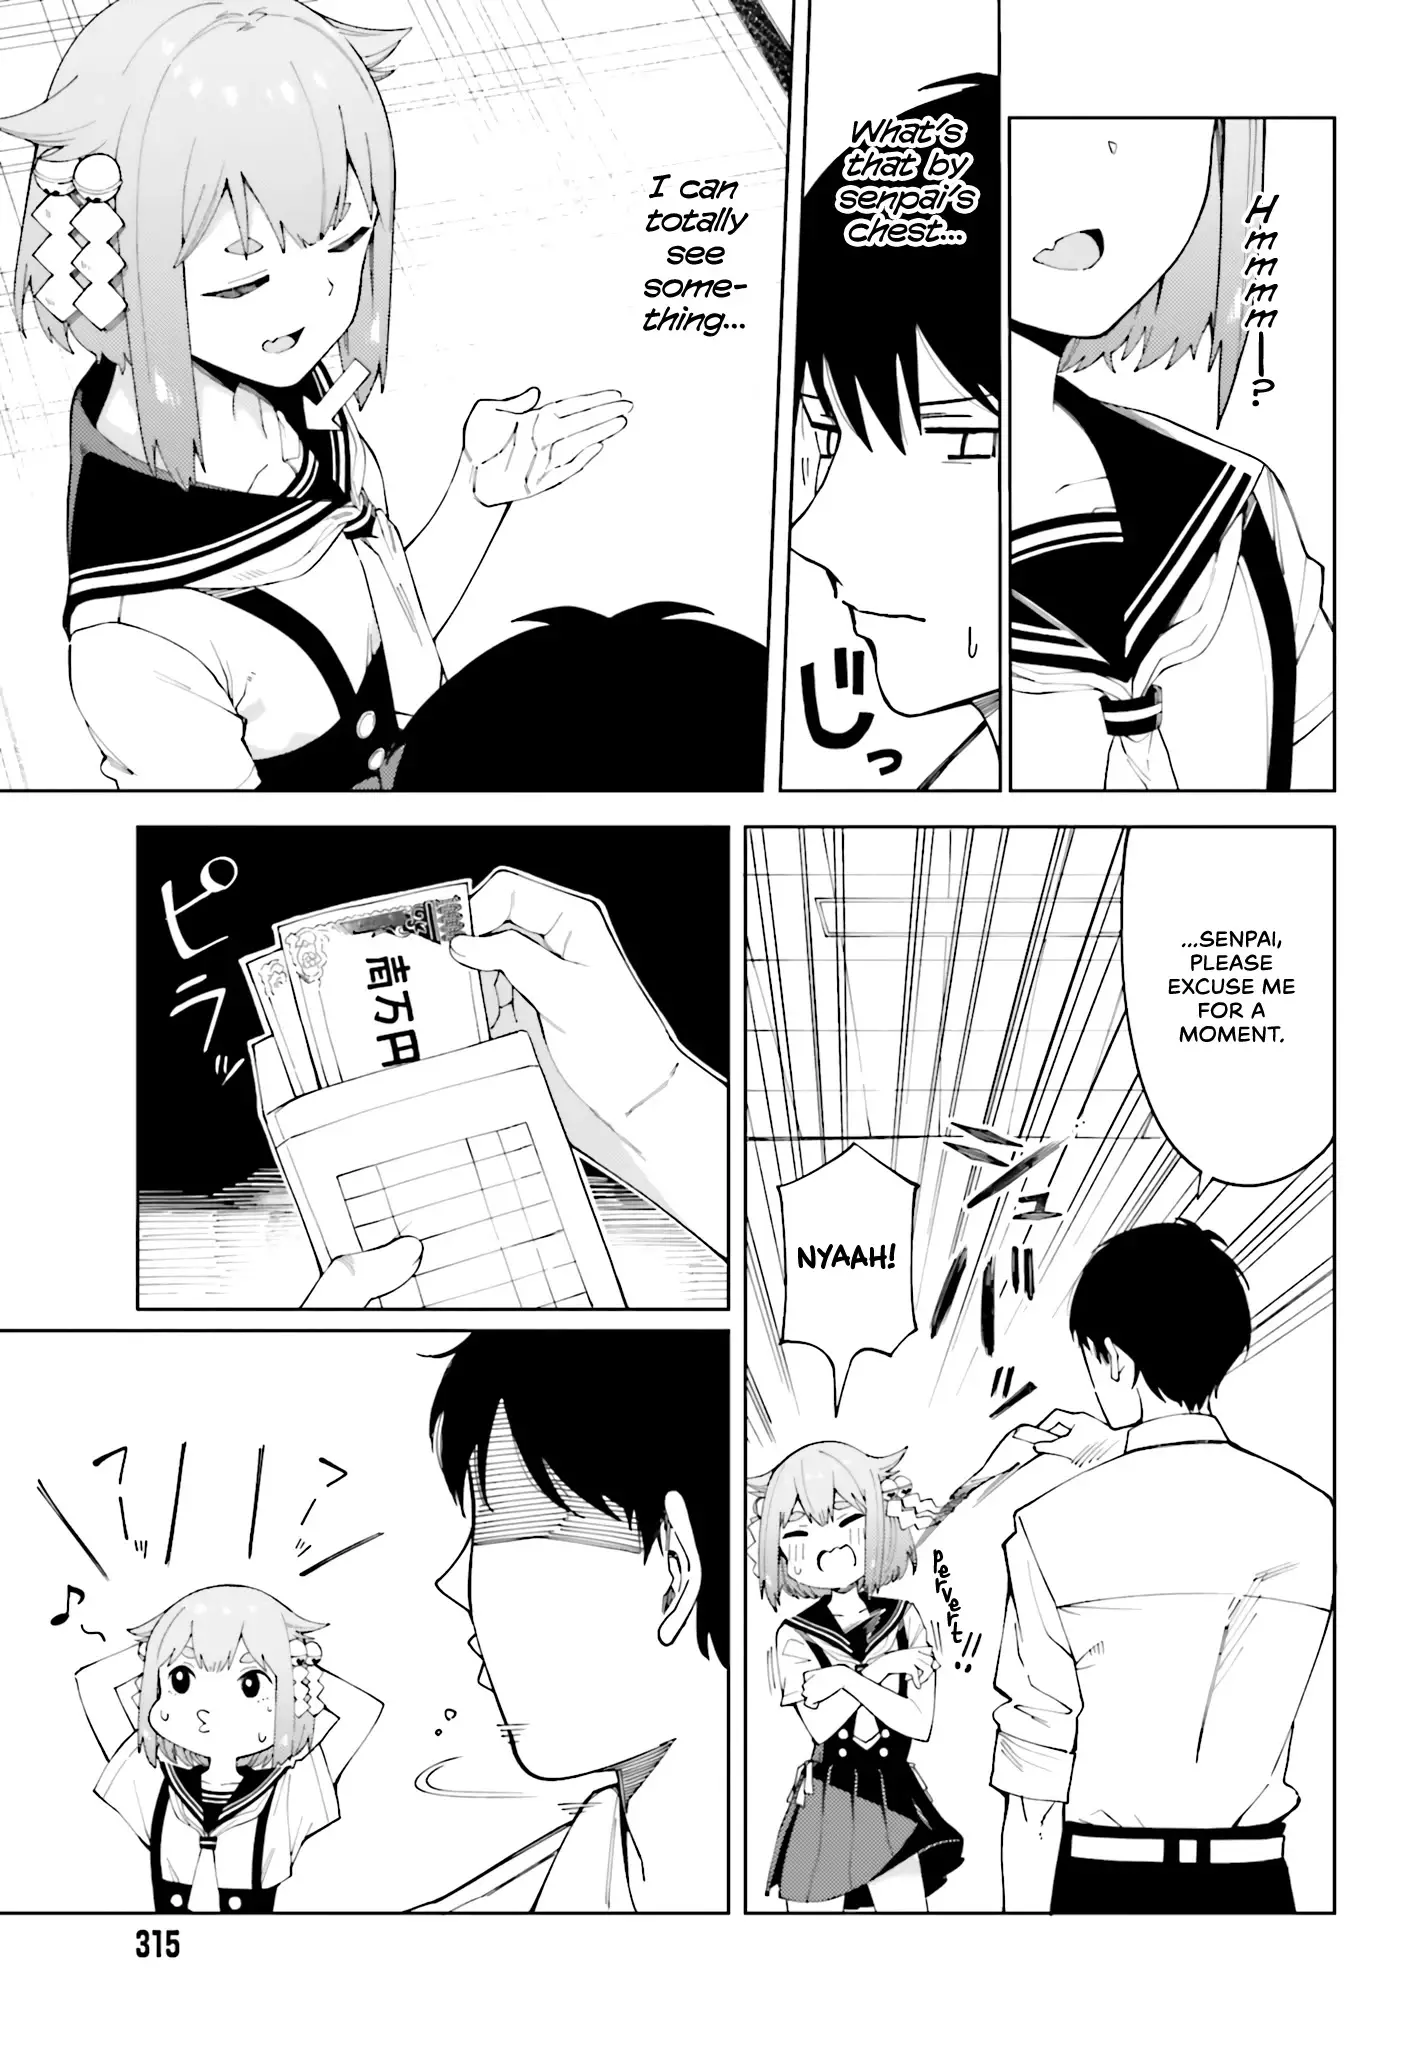 I Don't Understand Shirogane-San's Facial Expression At All - 1 page 16